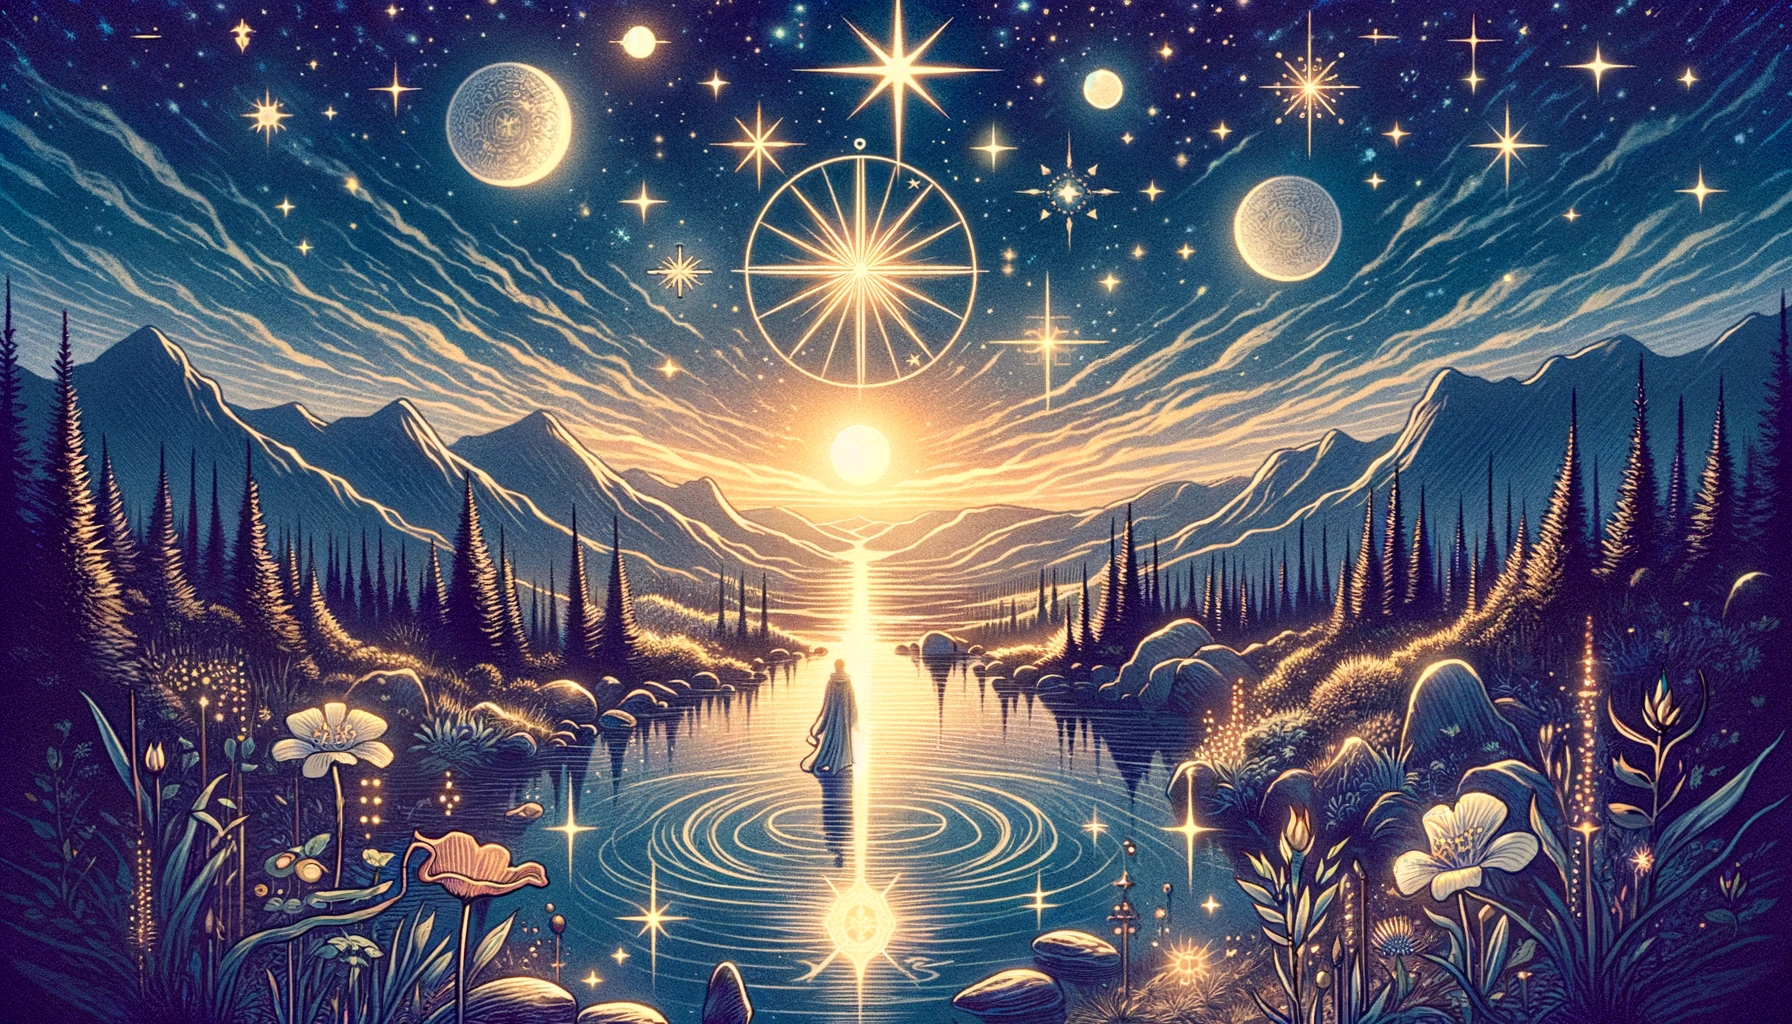 "Depiction of navigating through a period of healing and growth with themes of hope, inspiration, and the search for spiritual clarity, setting an engaging and optimistic tone for your article discussing 'The Star' as representing a situational aspect of life, highlighting the potential for positive change."